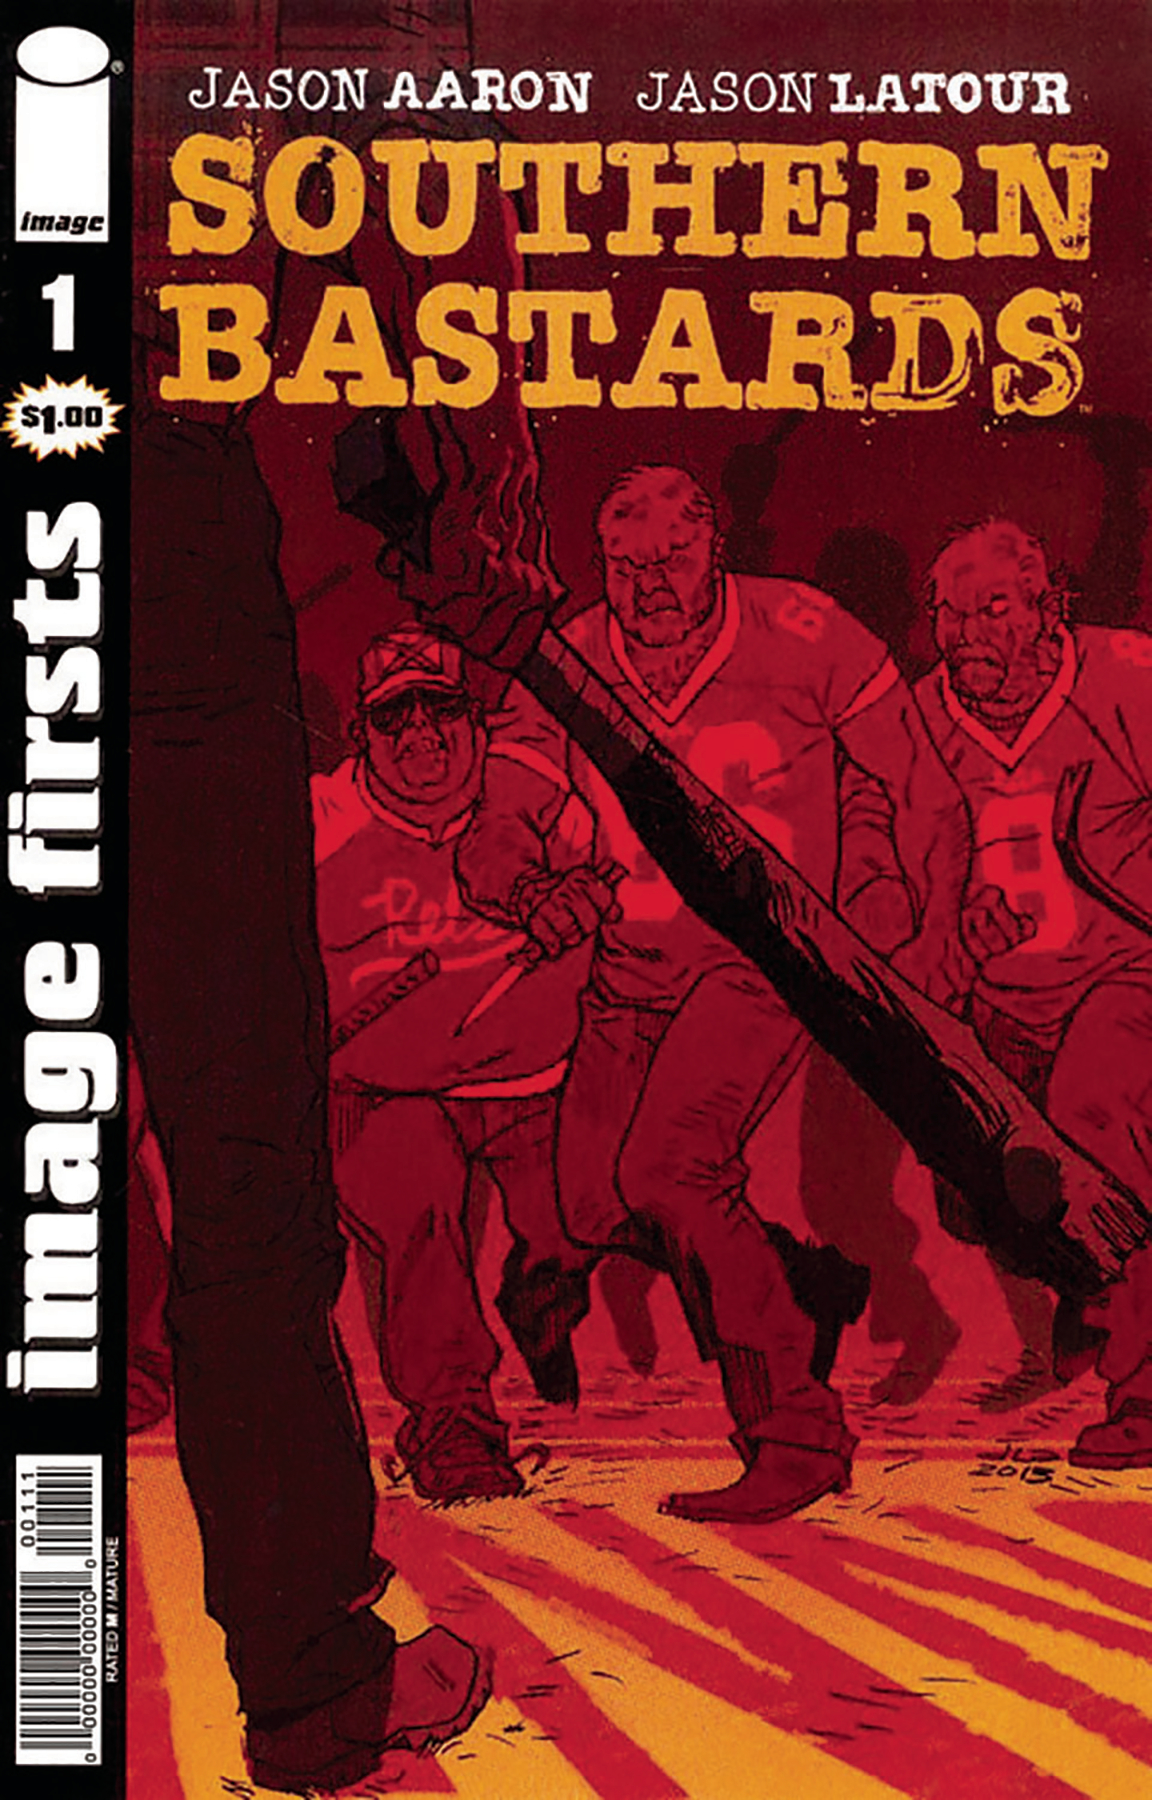 Image Firsts Southern Bastards Volume 63 (Mature)